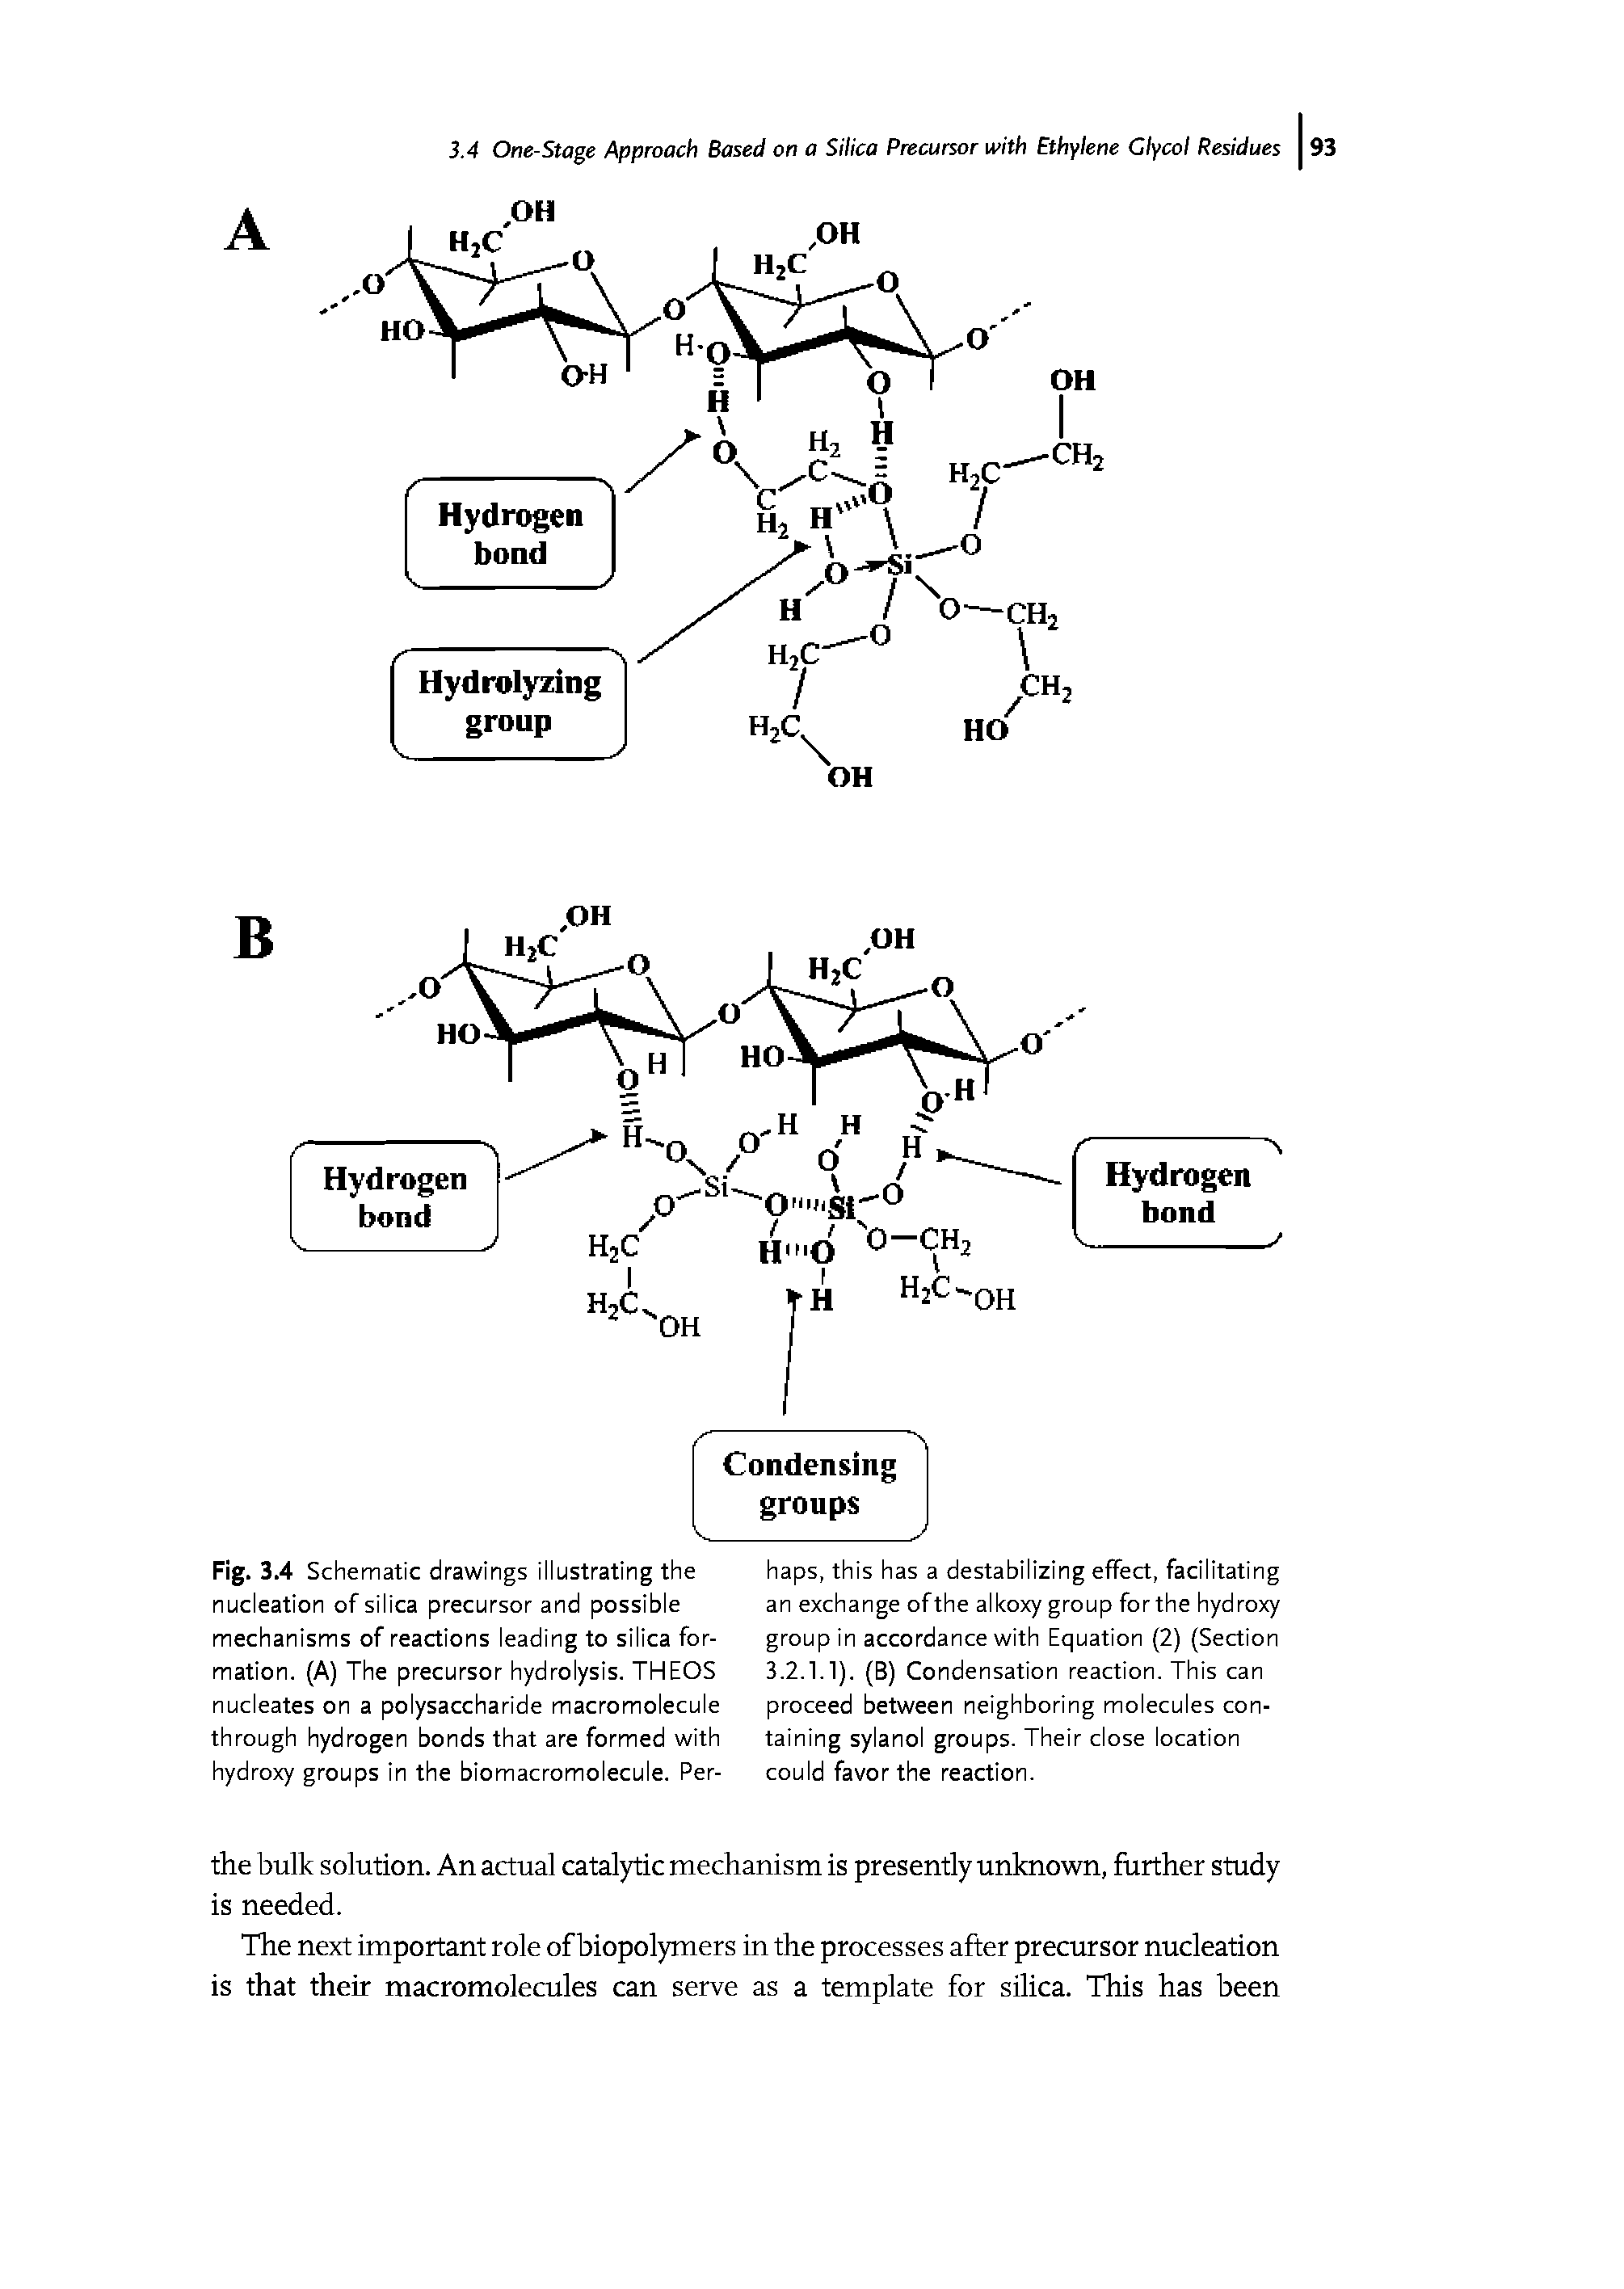 Fig. 3.4 Schematic drawings illustrating the nucleation of silica precursor and possible mechanisms of reactions leading to silica formation. (A) The precursor hydrolysis. THEOS nucleates on a polysaccharide macromolecule through hydrogen bonds that are formed with hydroxy groups in the biomacromolecule. Per-...